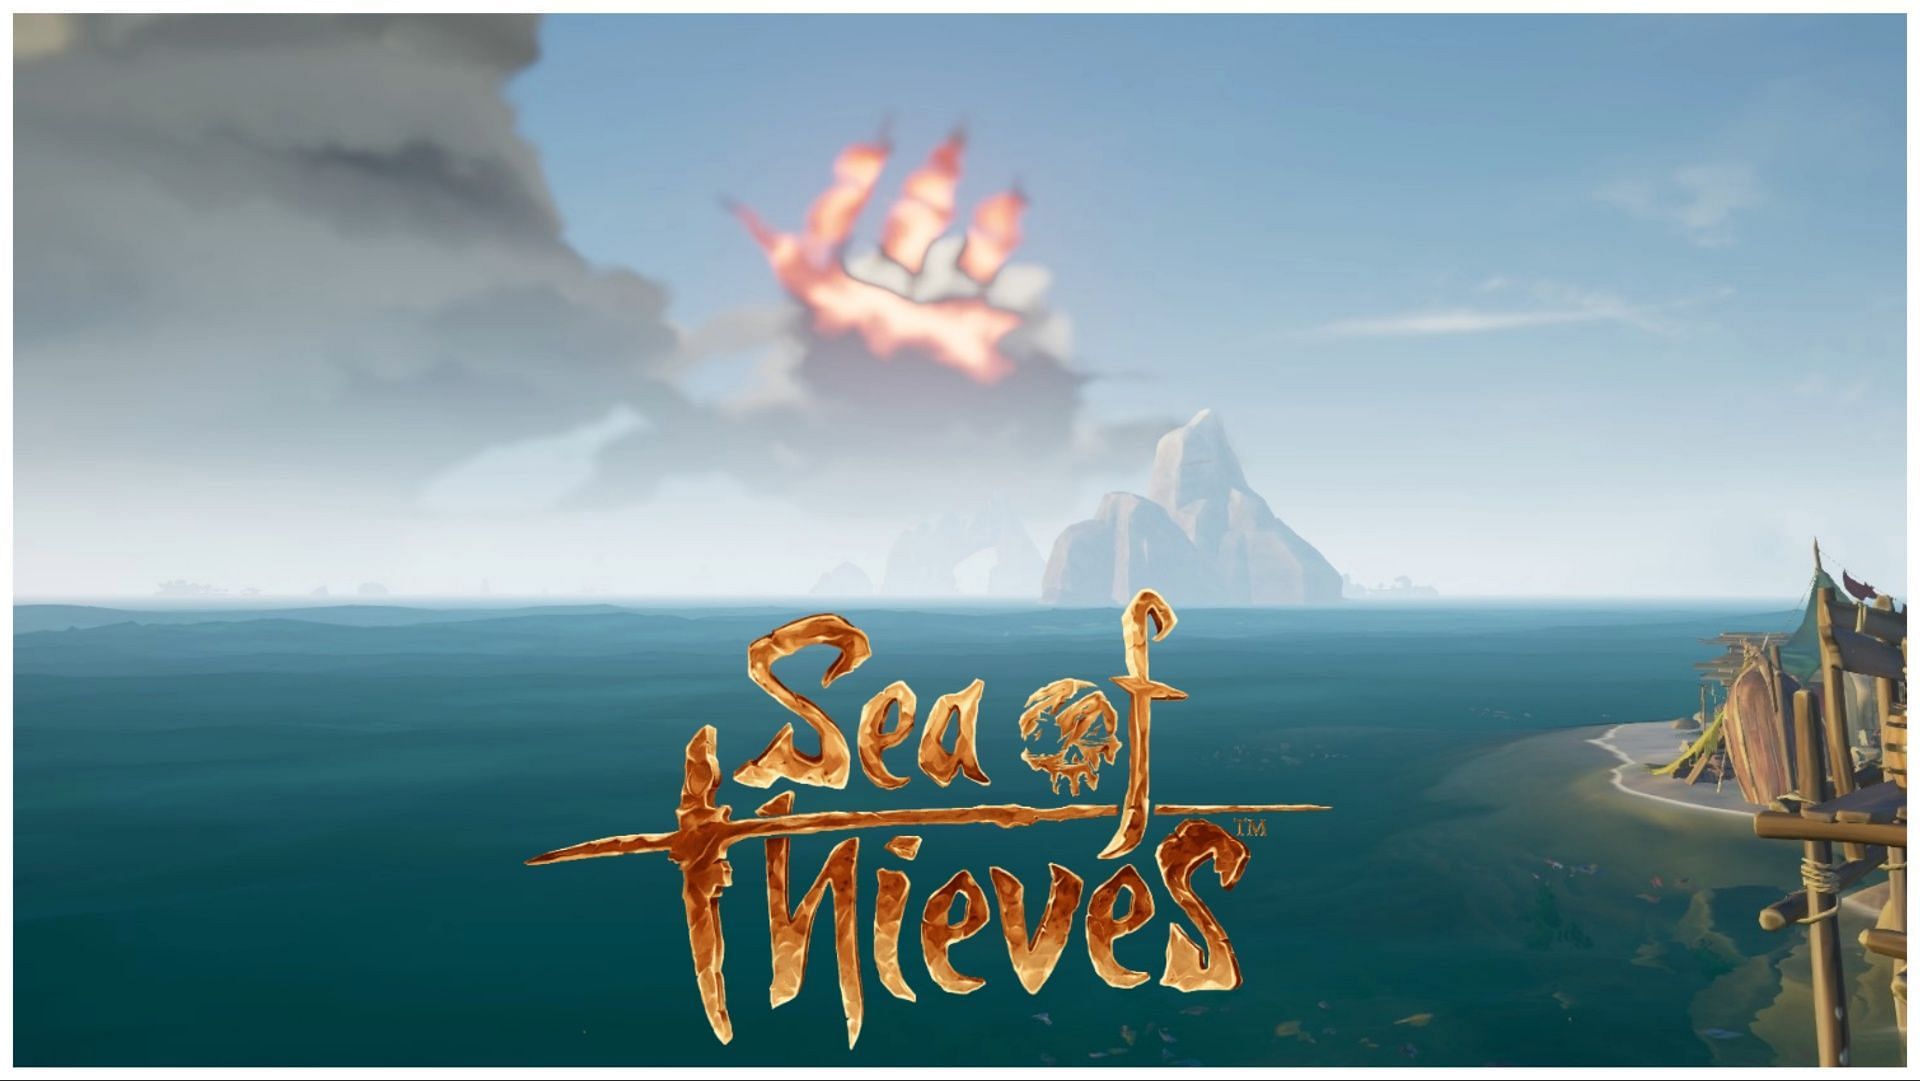 Fleet of Fortune in Sea of Thieves marker, as seen in the game.